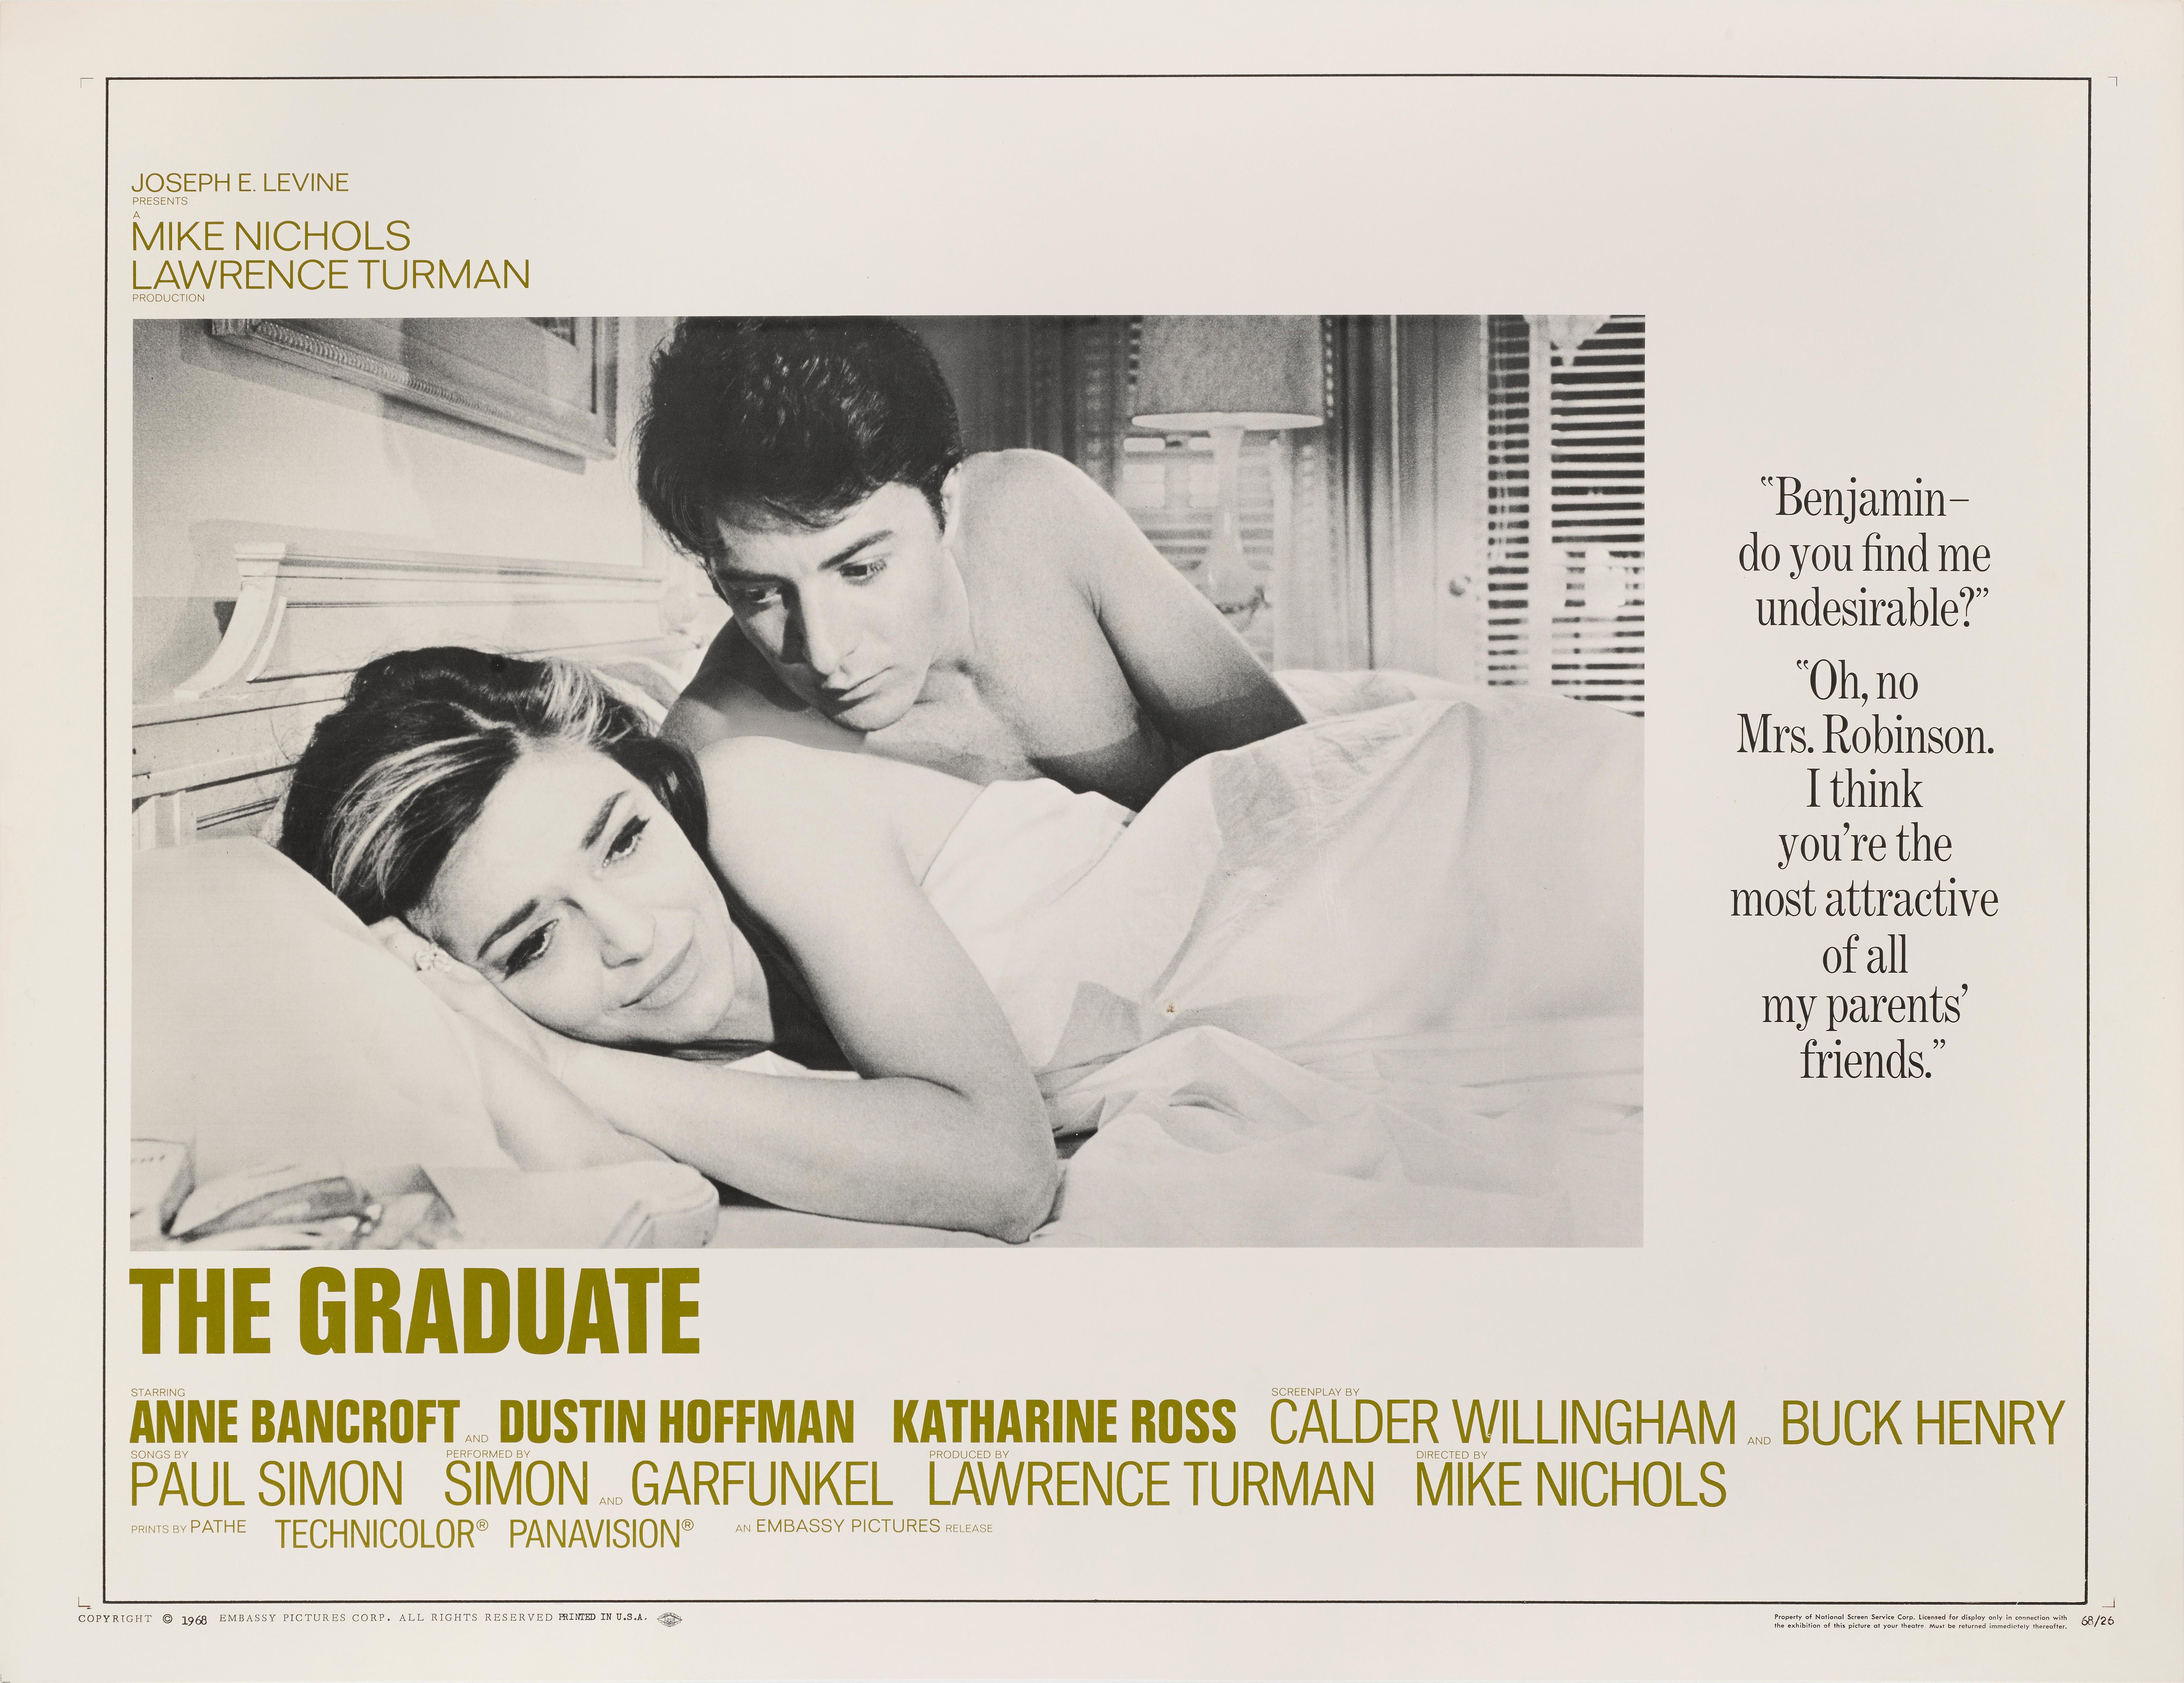 Original US film poster for Dustin Hoffman, Anne Bancroft, Katherine Ross's 1967 classic drama directed by Mike Nichols. This poster is from the original release before the film won an Oscar and then new posters were printed with the Oscar on.
This